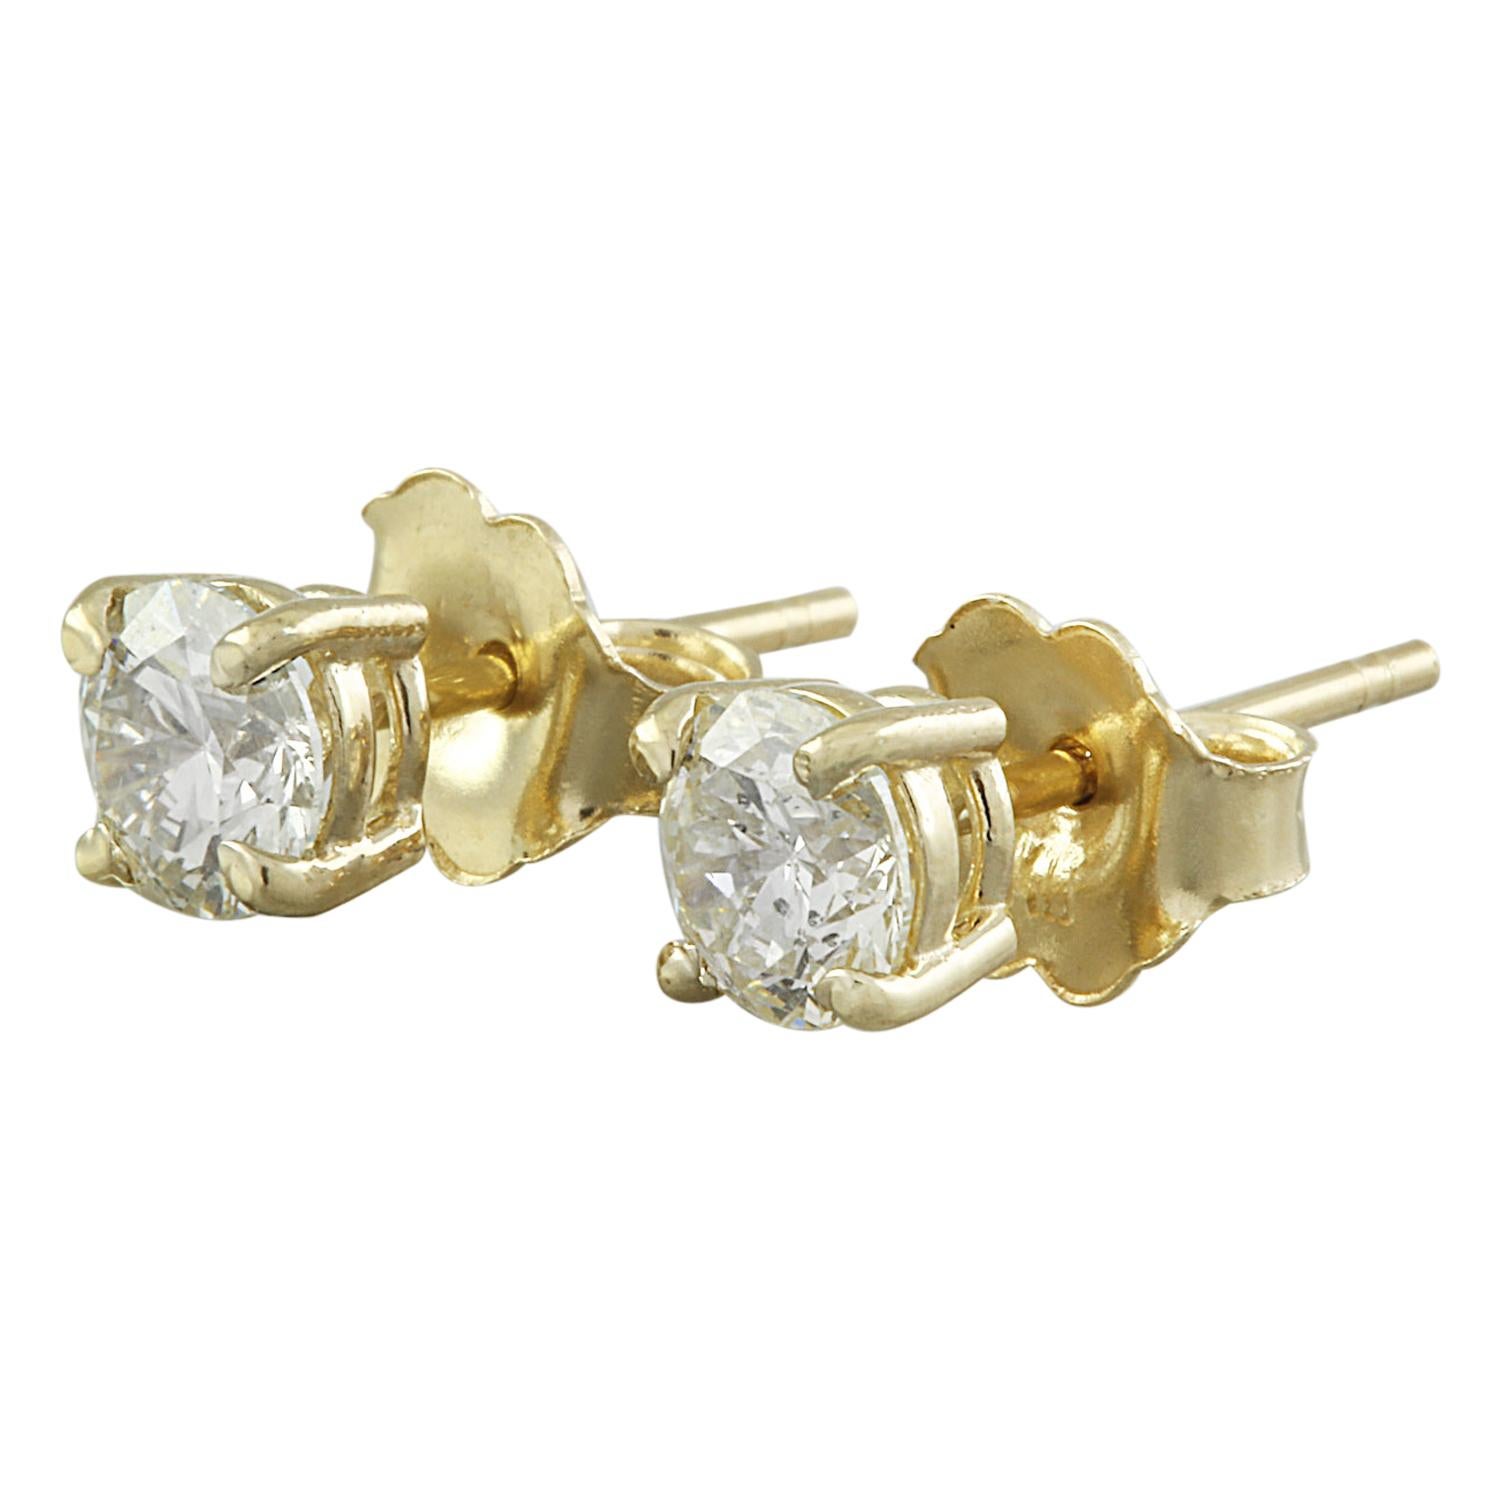 Introducing our elegant 0.80 Carat Natural Diamond Stud Earrings in 14 Karat Yellow Gold. Stamped with 14K authenticity, these earrings have a total weight of 0.9 grams. Each earring features a sparkling natural diamond totaling in weight of 0.80